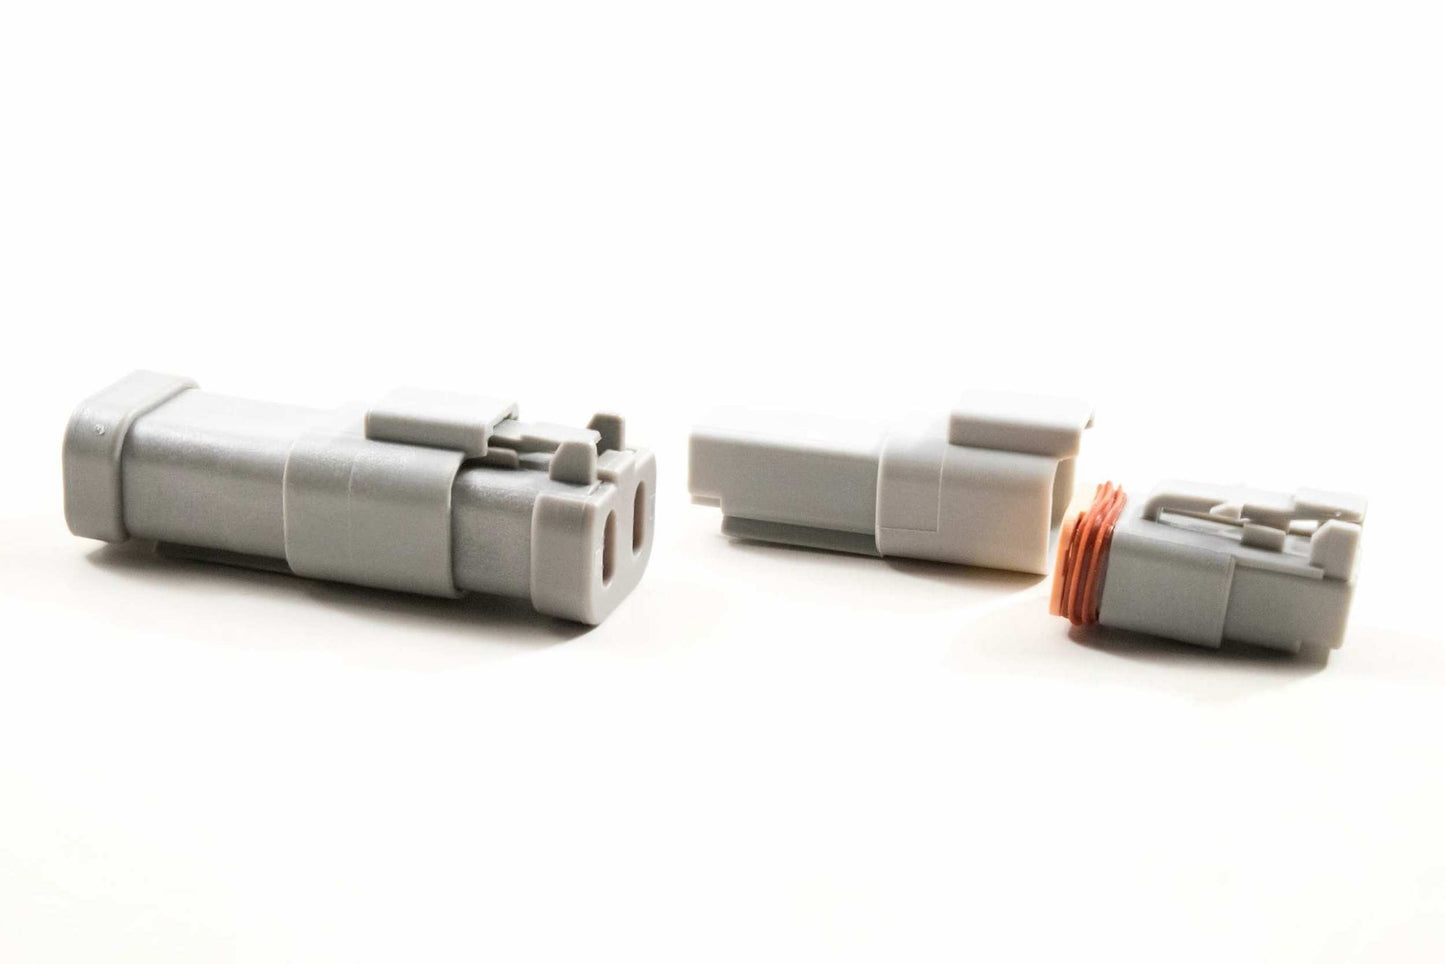 Connector: DT Female - 6 pin